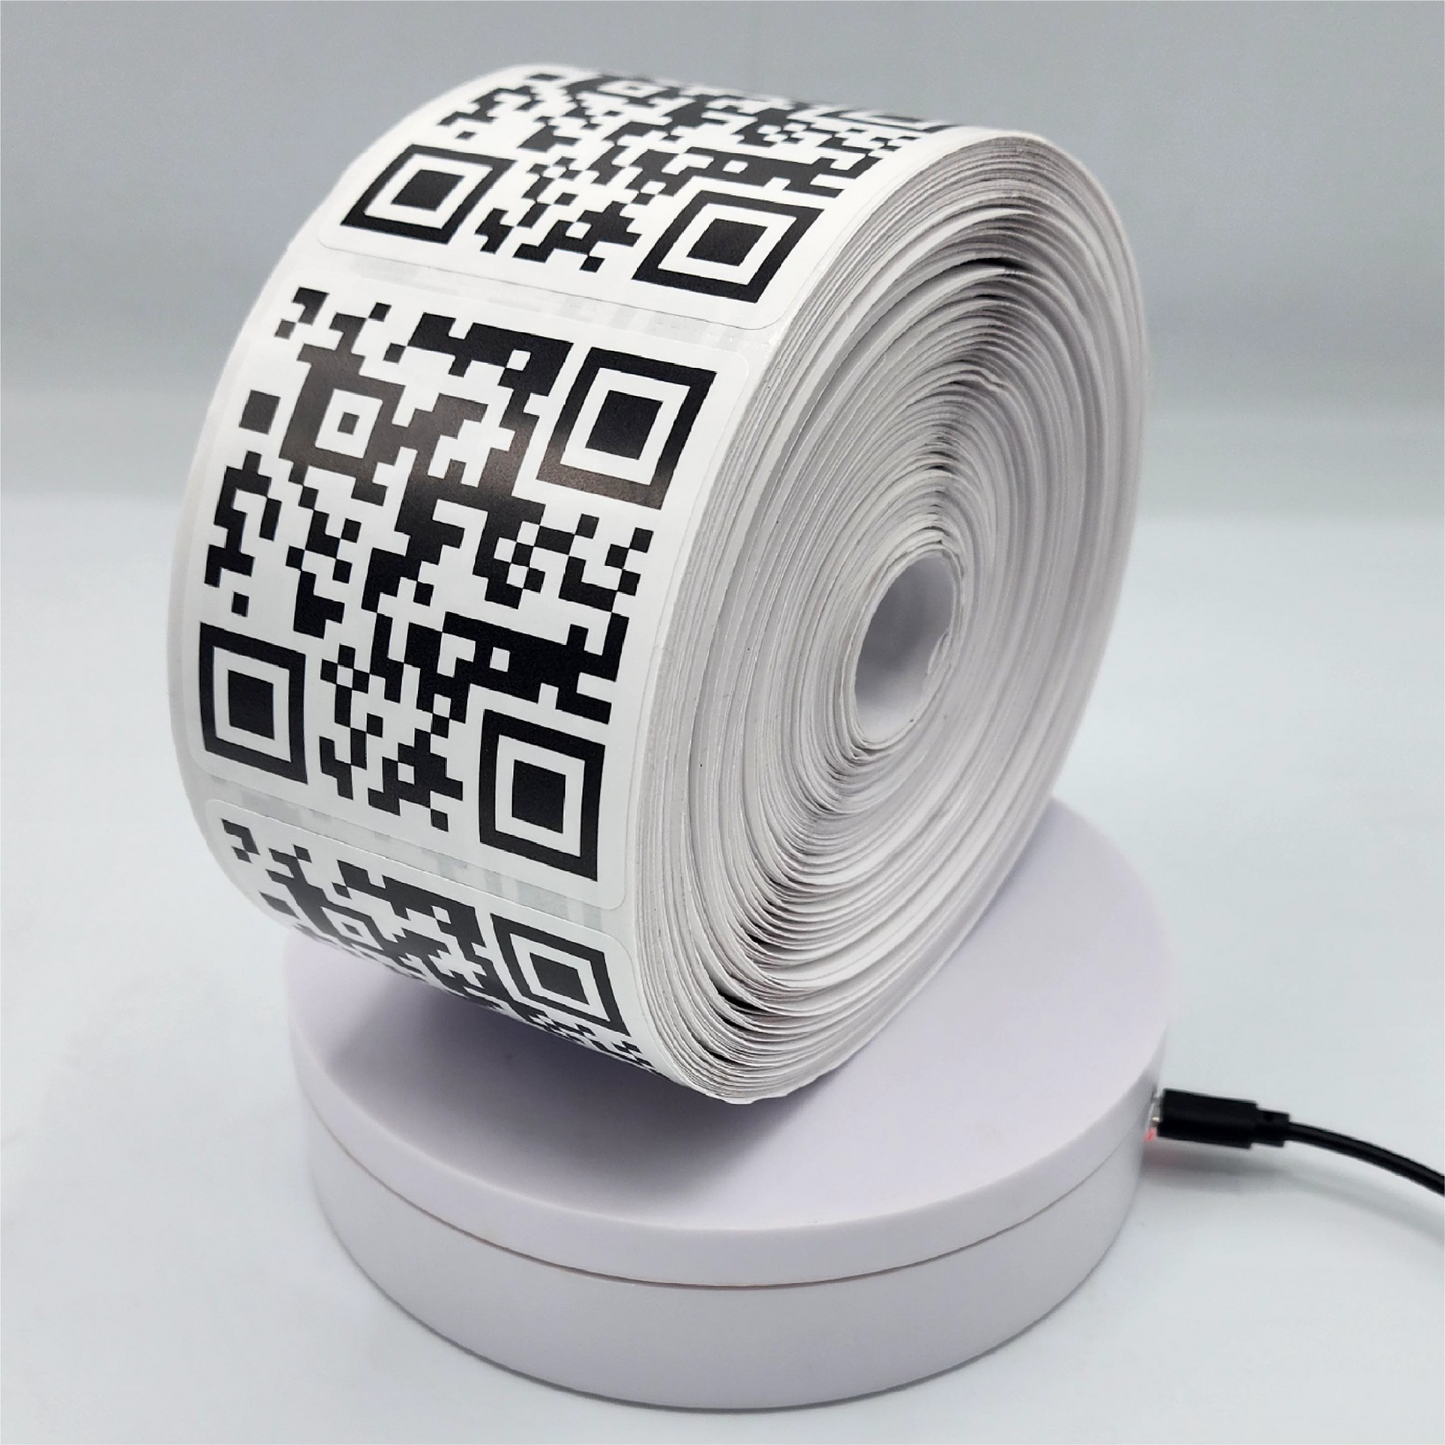 Glossy Label - Roll - 2.5" x2.5" Square